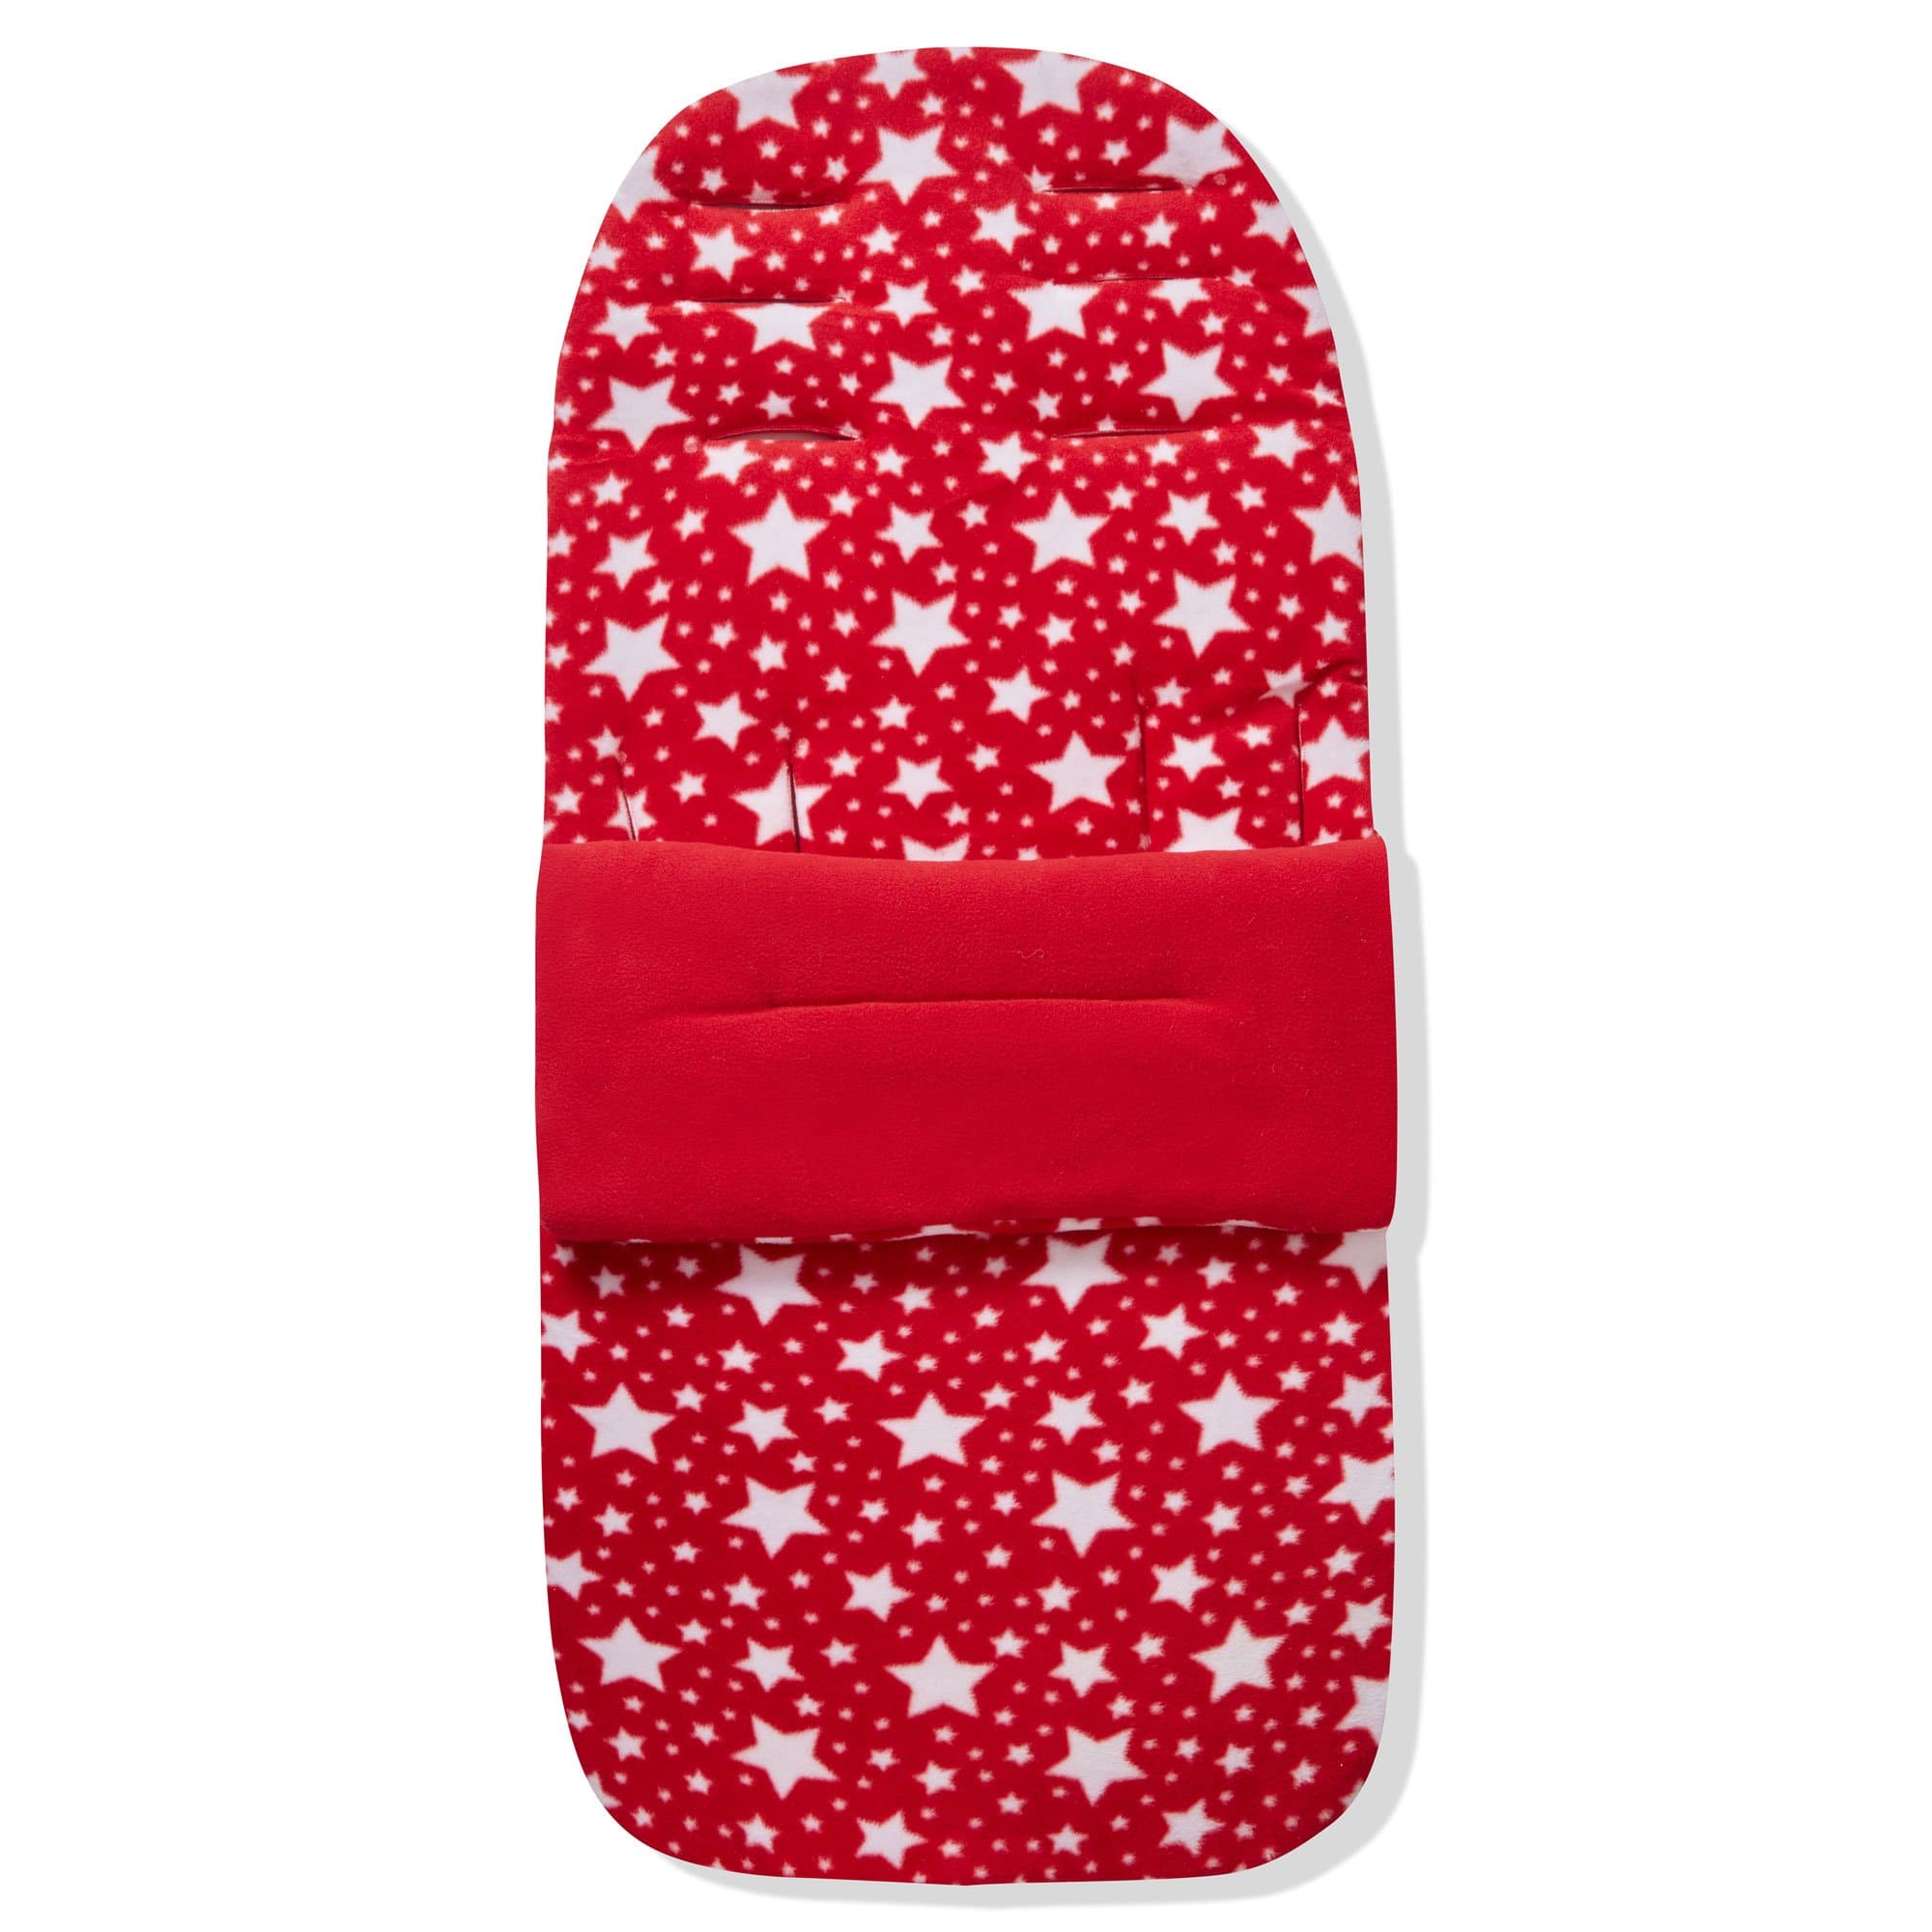 Fleece Footmuff / Cosy Toes Compatible with Zeta - Red Star / Fits All Models | For Your Little One